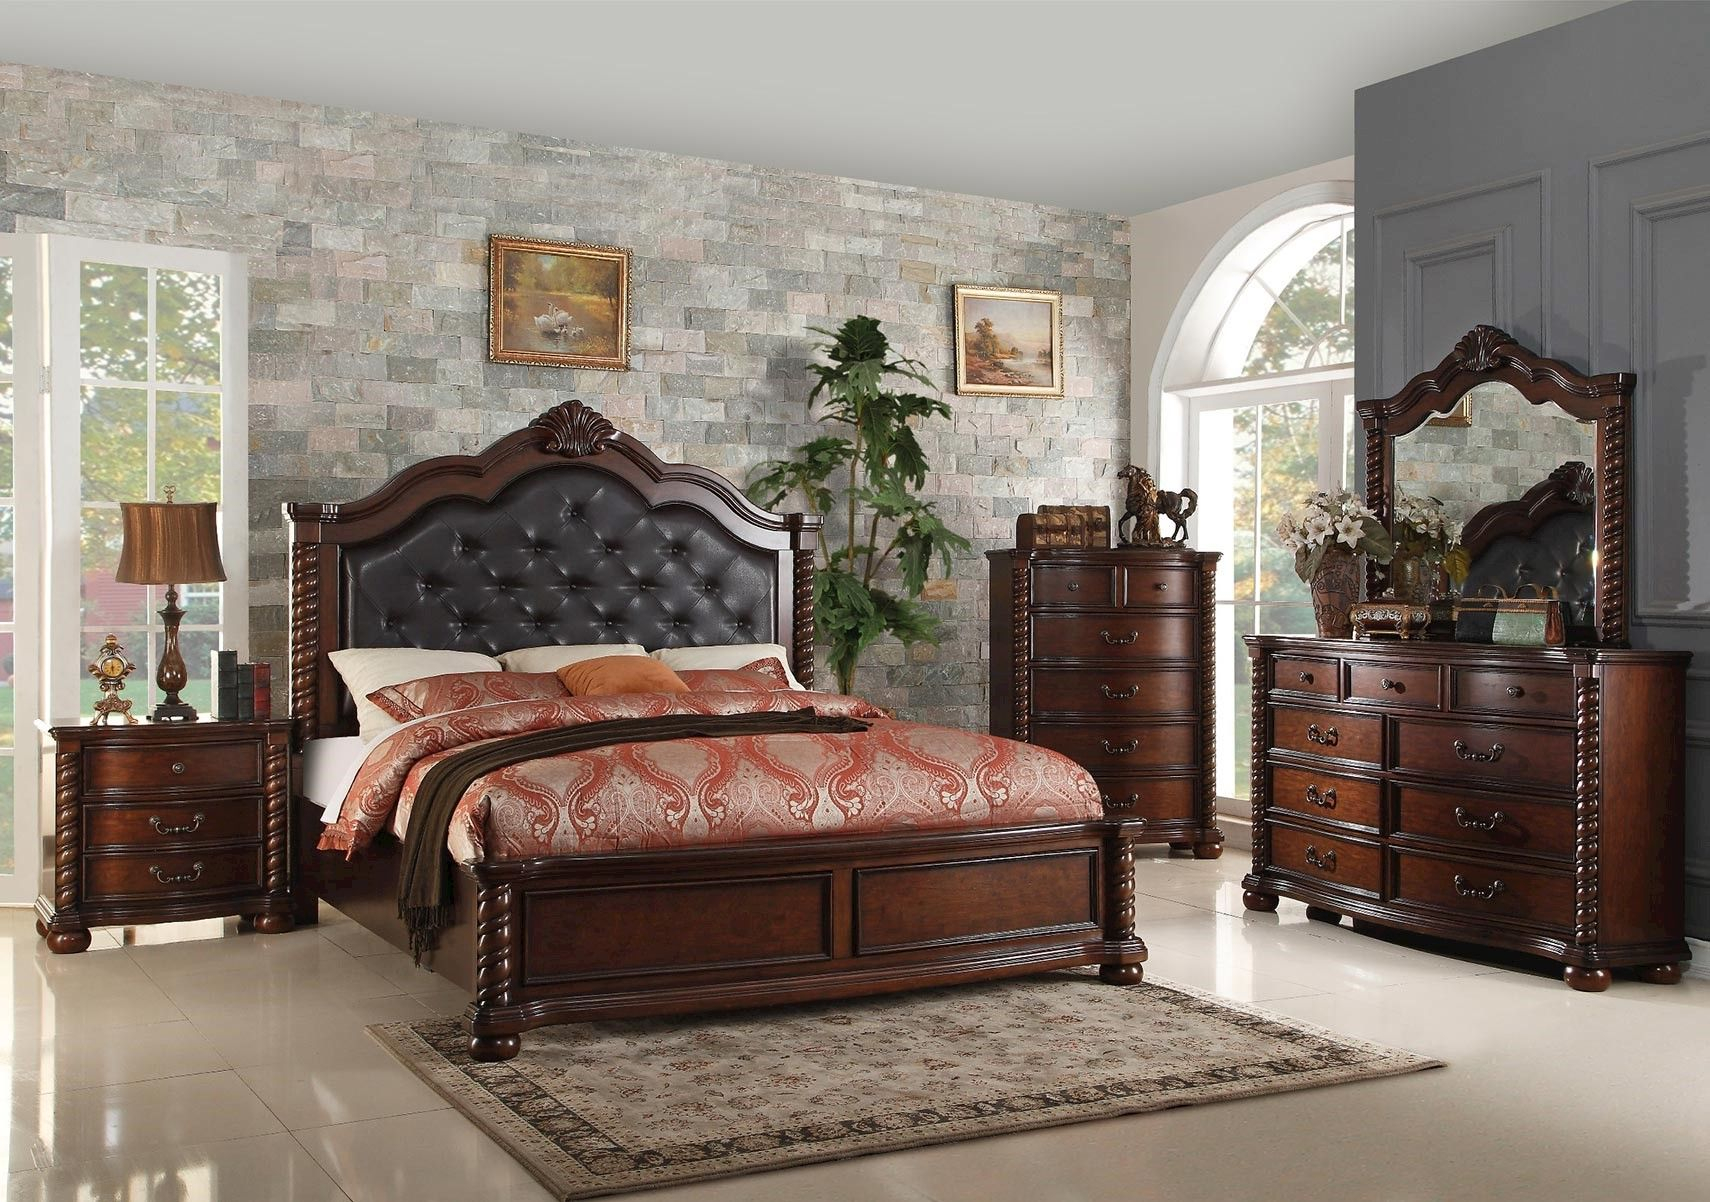 Lacks Montarosa 4 Pc Queen Bedroom Set Leather Faux Leather intended for dimensions 1710 X 1202